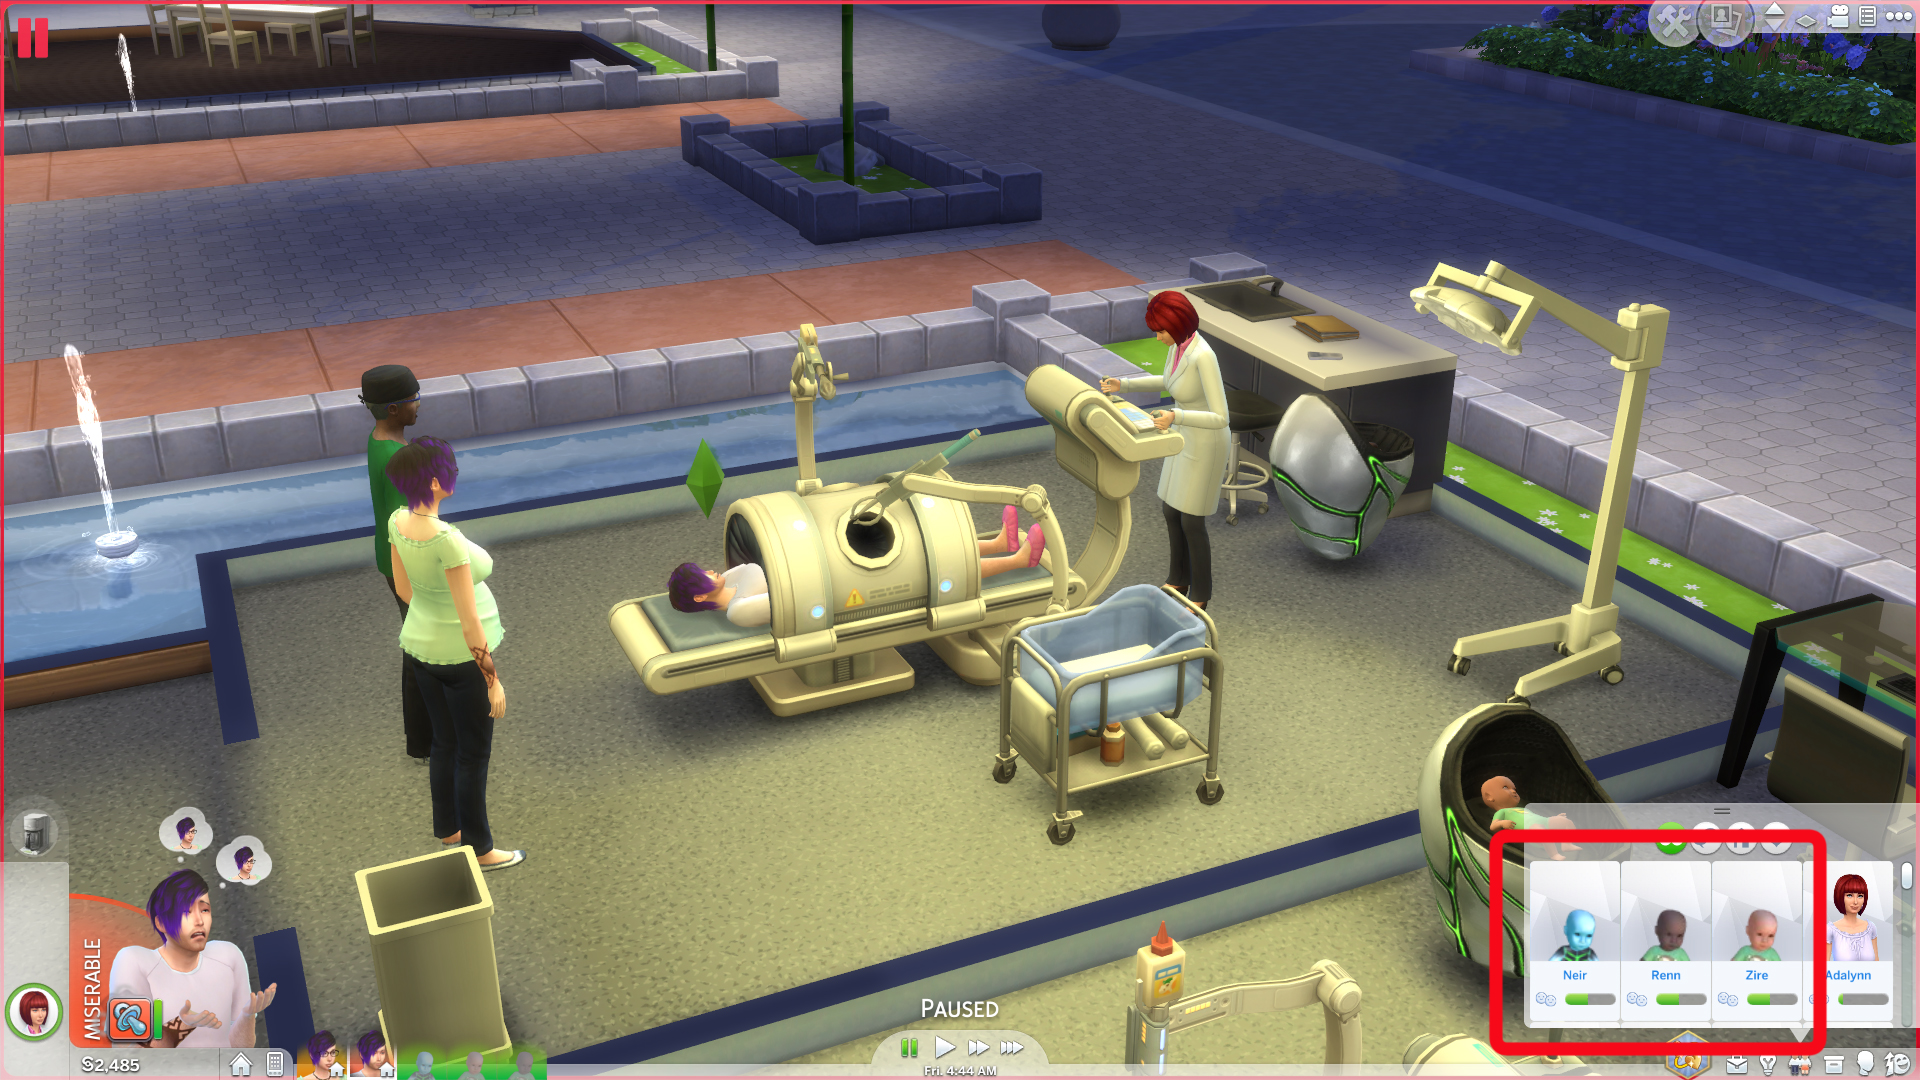 The Sims 4, Maxis & The Sims Studio, Electronic Arts, 2014/2015